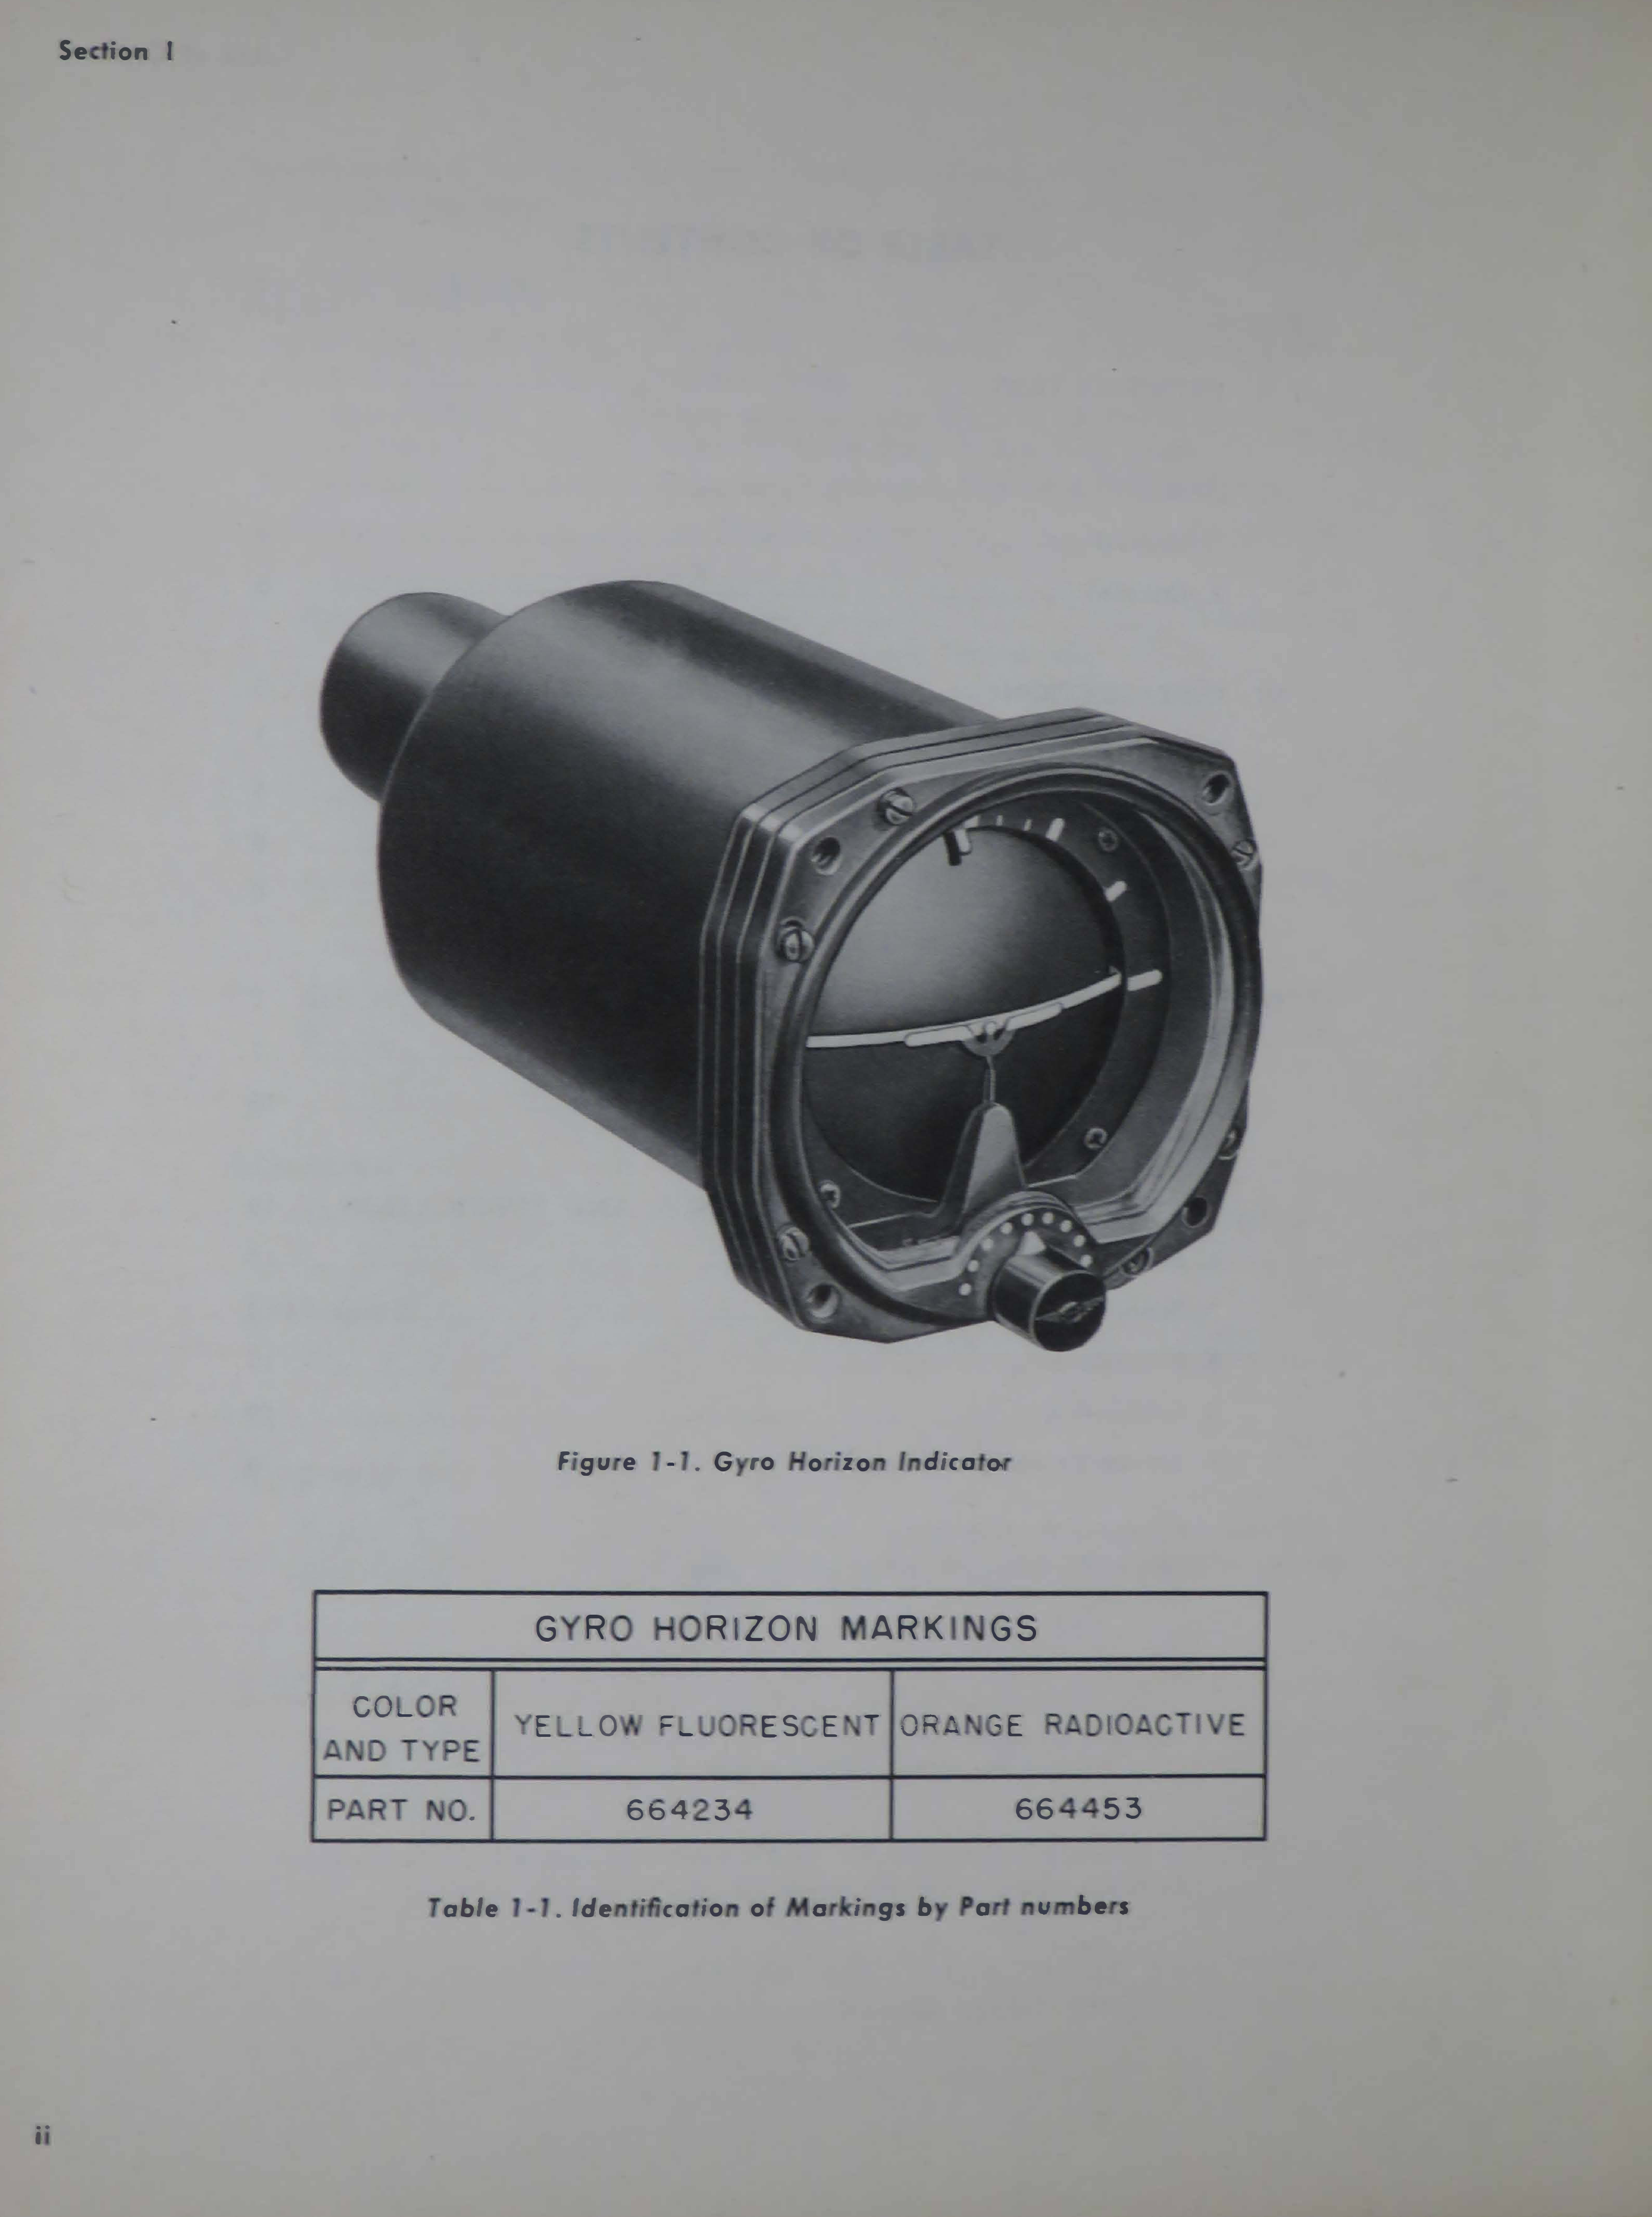 Sample page 6 from AirCorps Library document: Operation and Service for Model H-3 Gyro Horizon Indicator